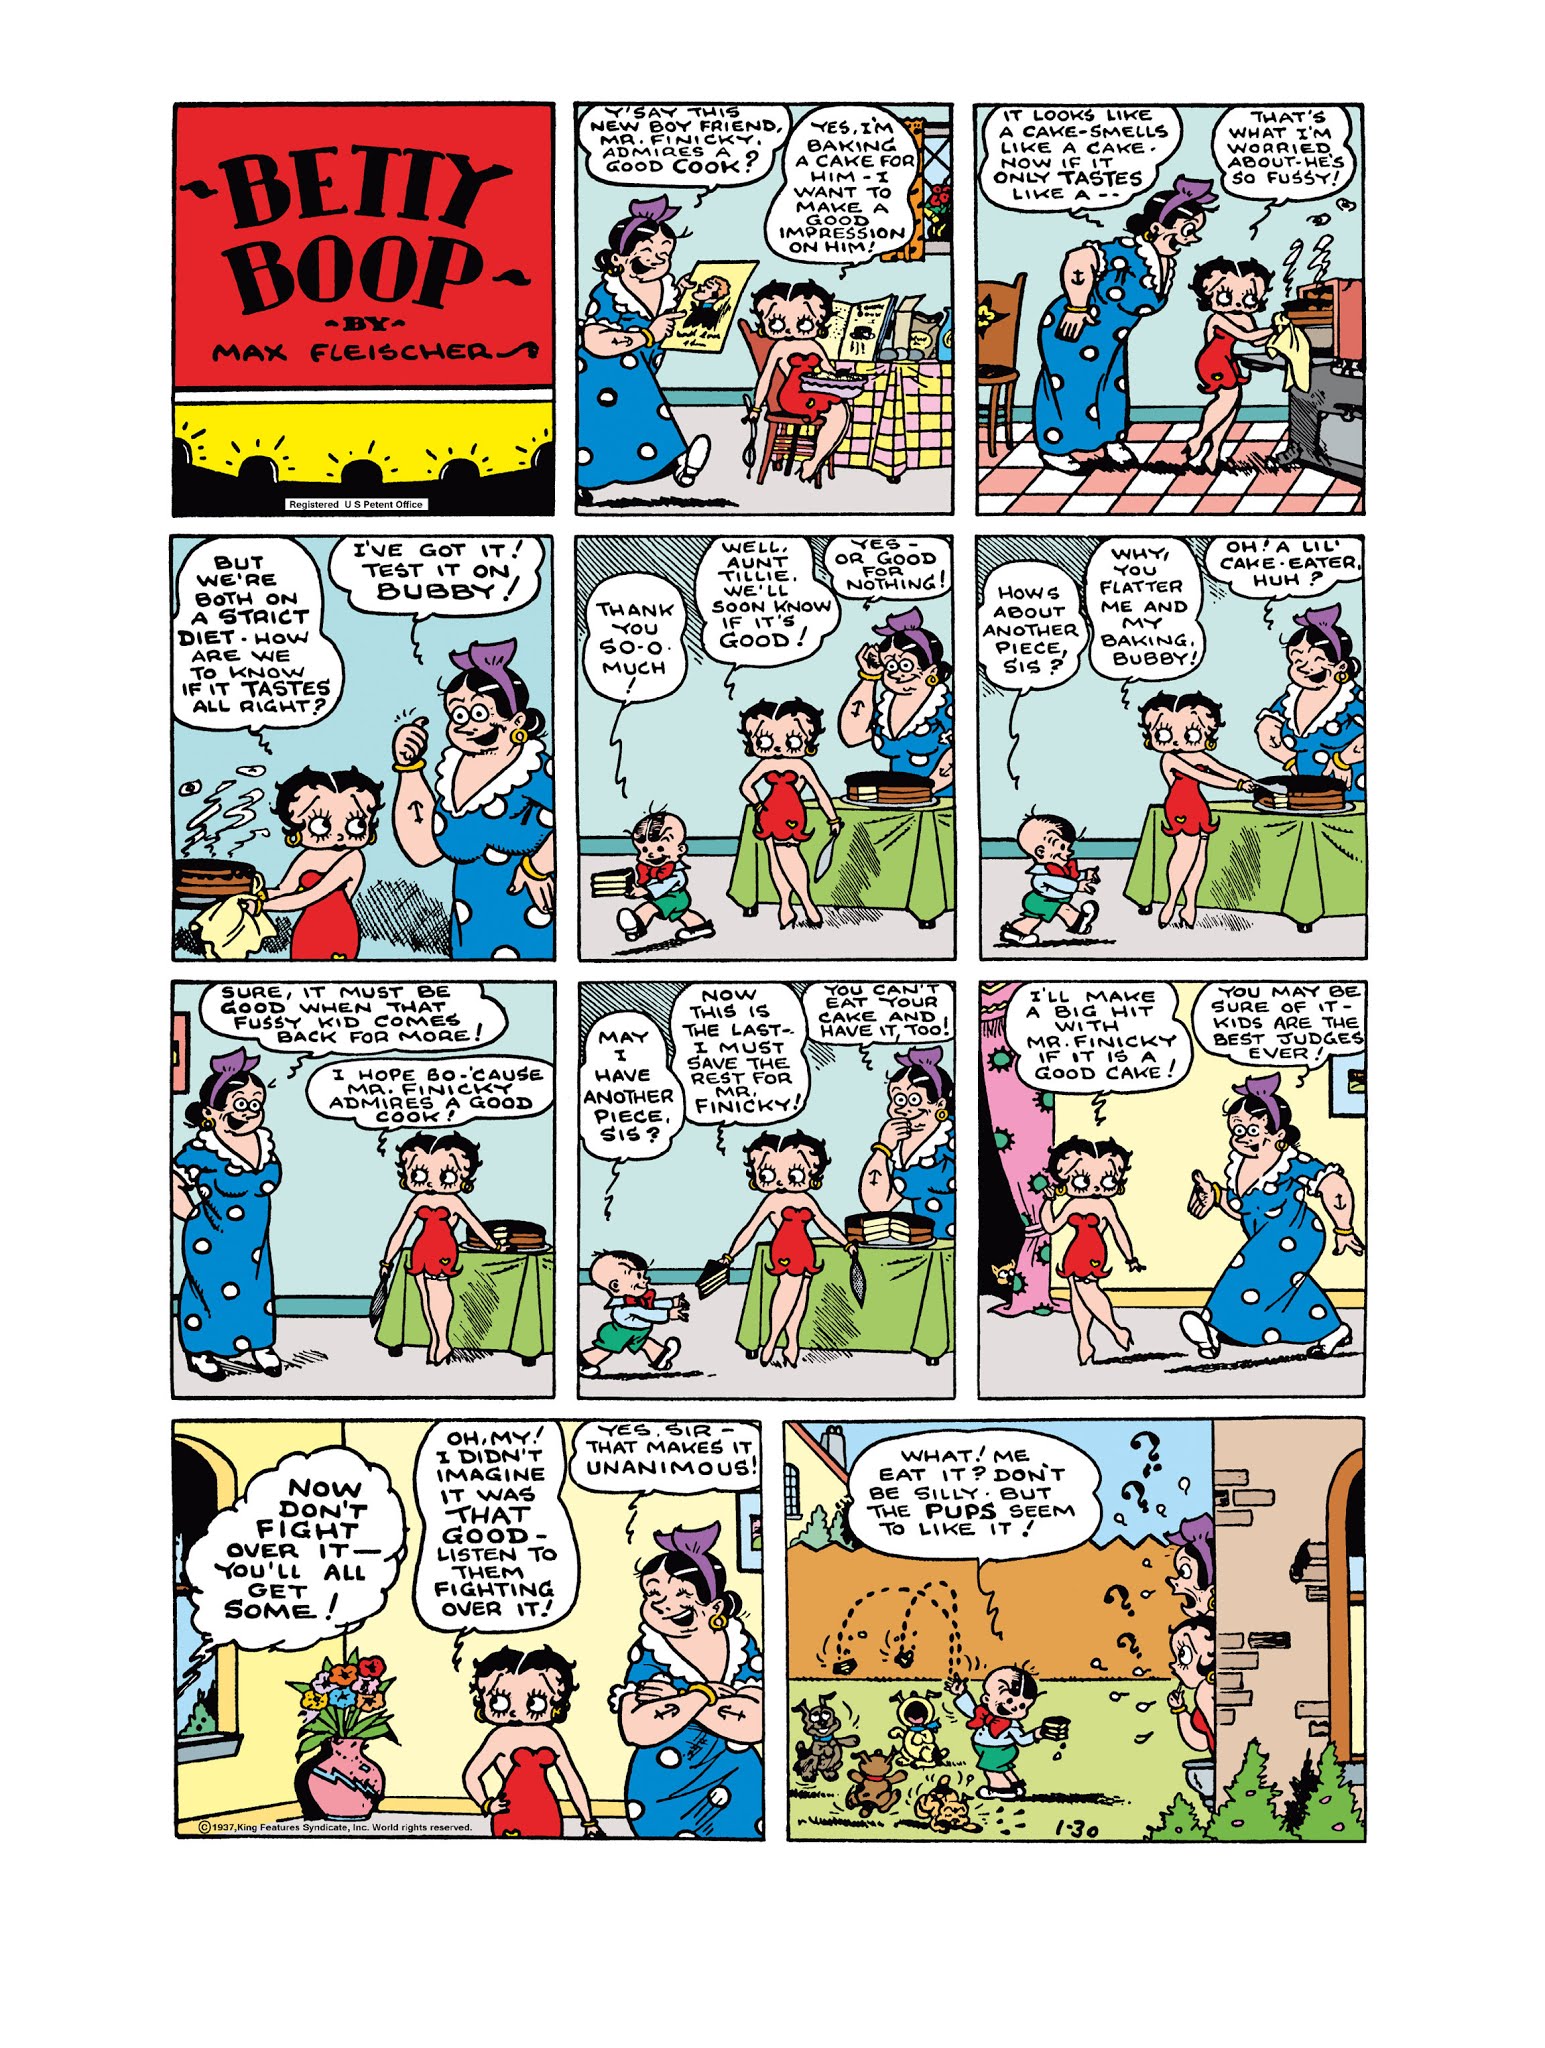 Read online The Definitive Betty Boop comic -  Issue # TPB - 142